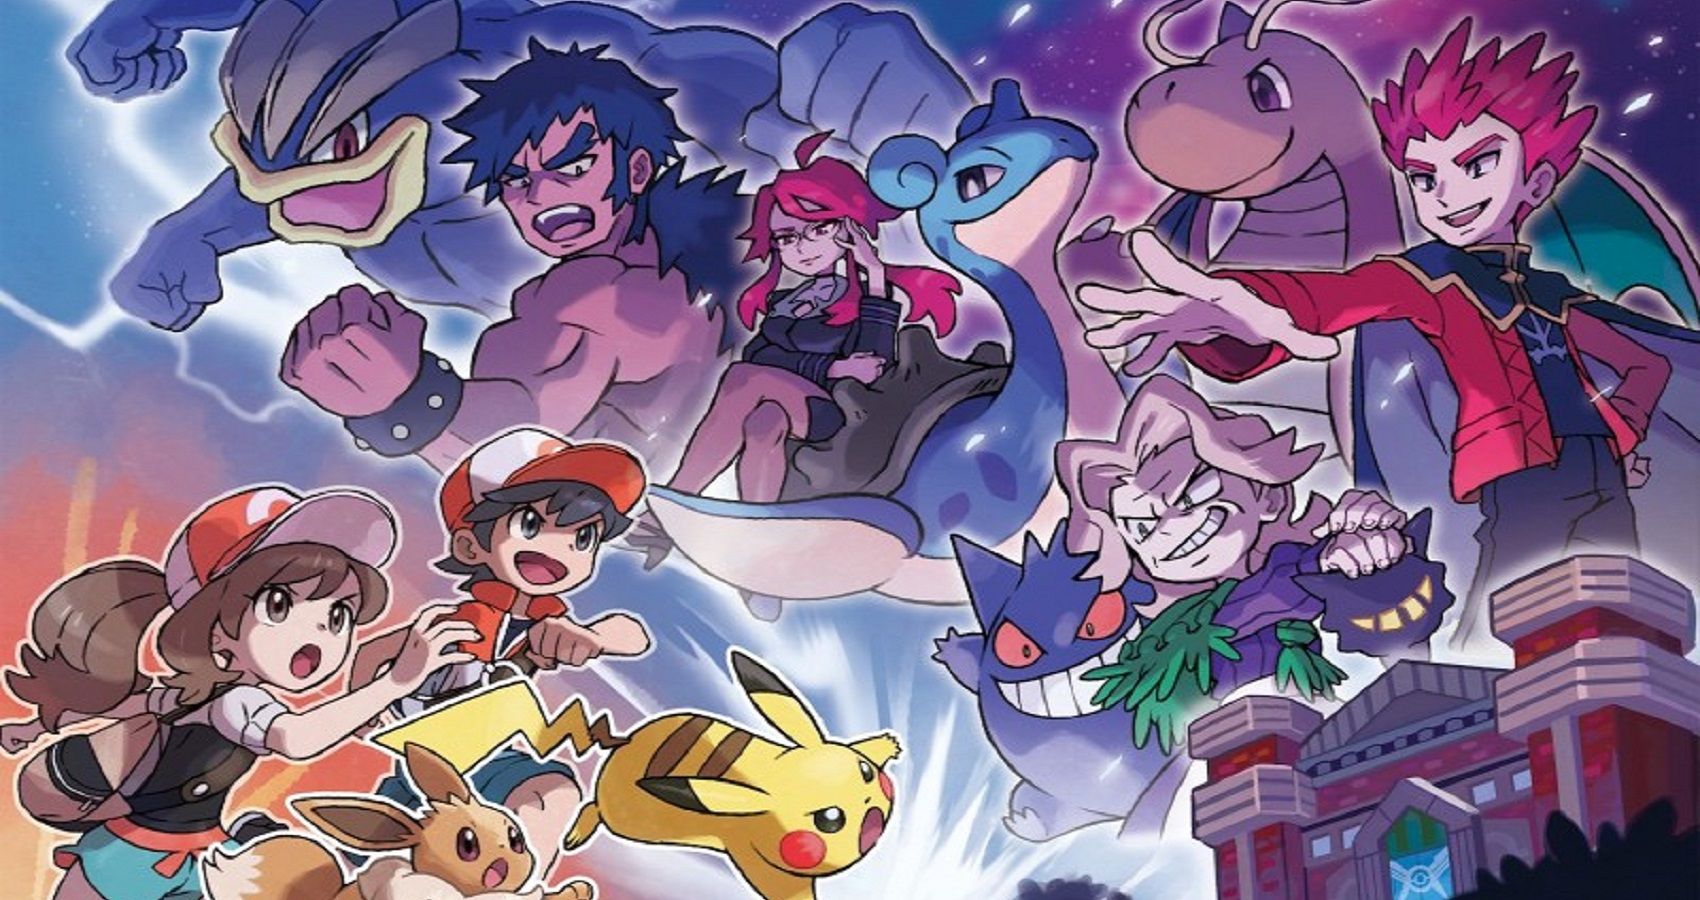 Top 10 Mainline Pokemon Games, Ranked (According to IGN)